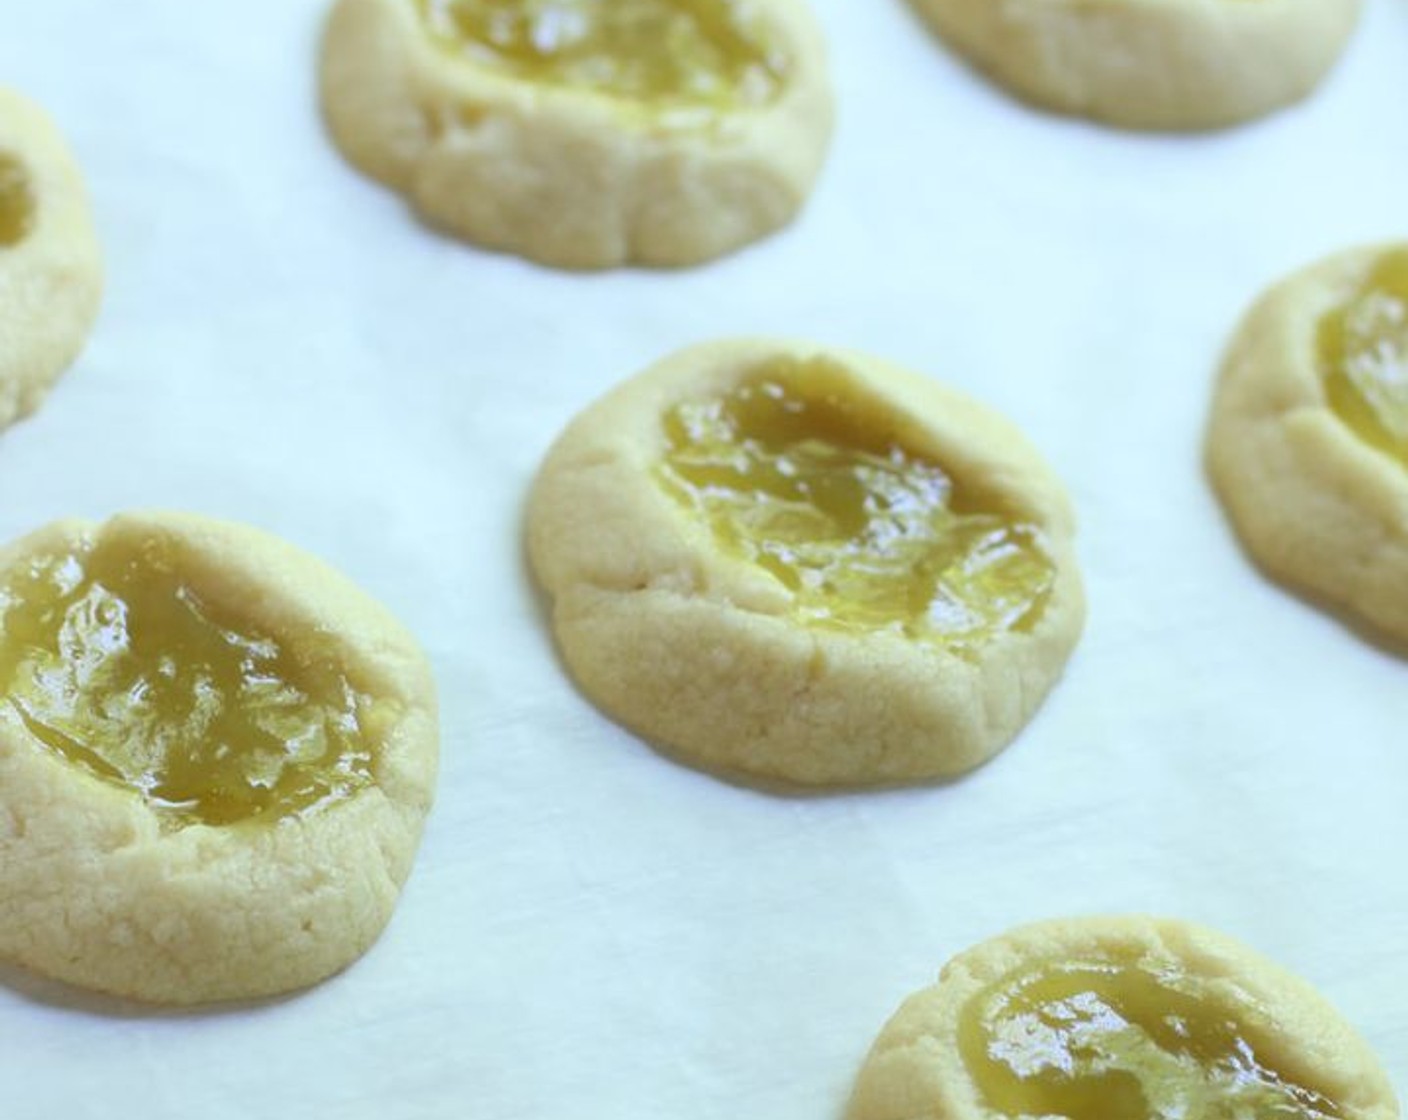 step 10 Remove from oven and immediately spoon an additional 1/2 teaspoon of Key Lime Curd (1/2 cup) into each cookie, smoothing it around to fill the indentation evenly. Allow the cookies to cool on the baking sheet. Cool to room temperature before glazing.